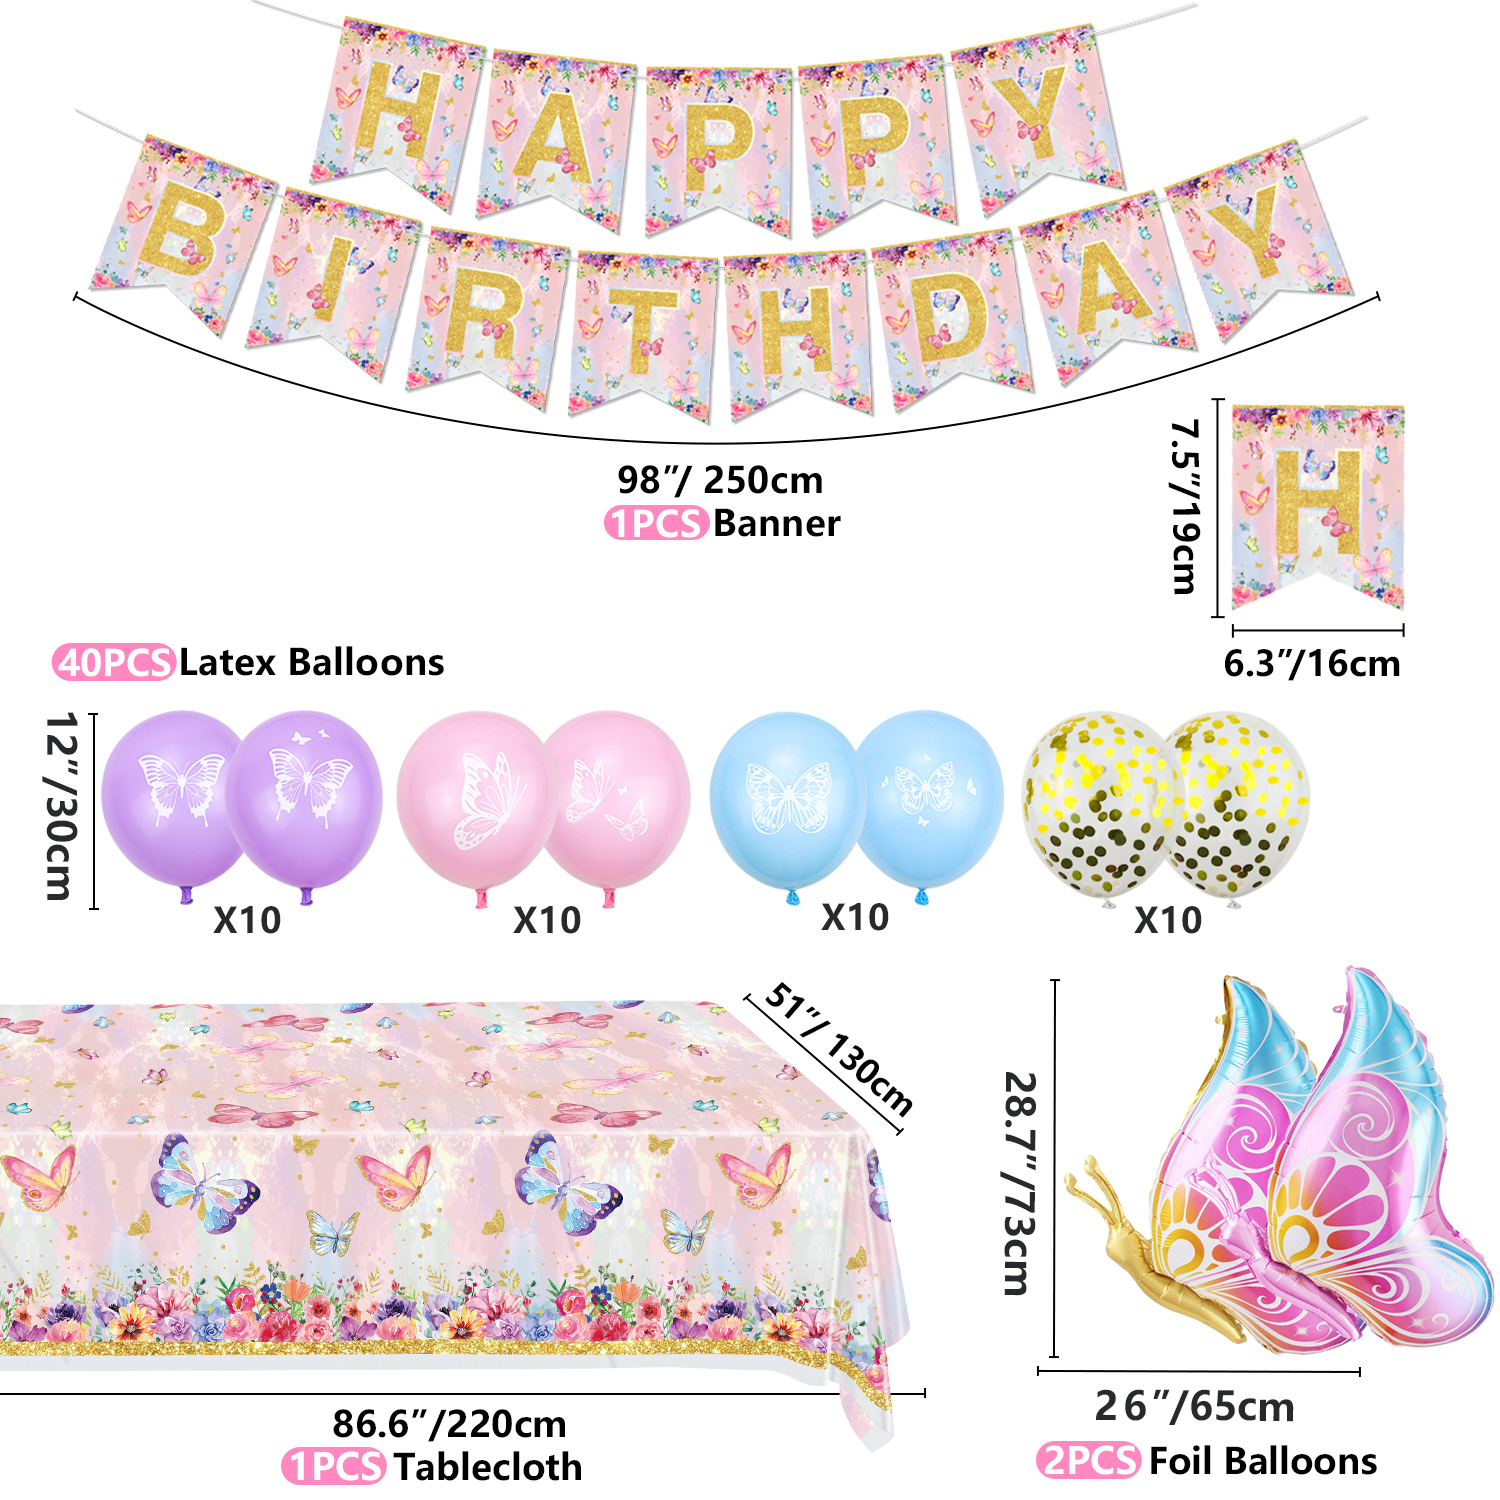 235 PCS Butterfly Party Decorations - Butterfly Balloons, Banner, Cake Topper, Fairy Wing, Tattoo, Stickers, Plates, Napkins, Cups and Tablecloth for Girl Women Birthday Supplies, Serves 20 Guest - image 3 of 8